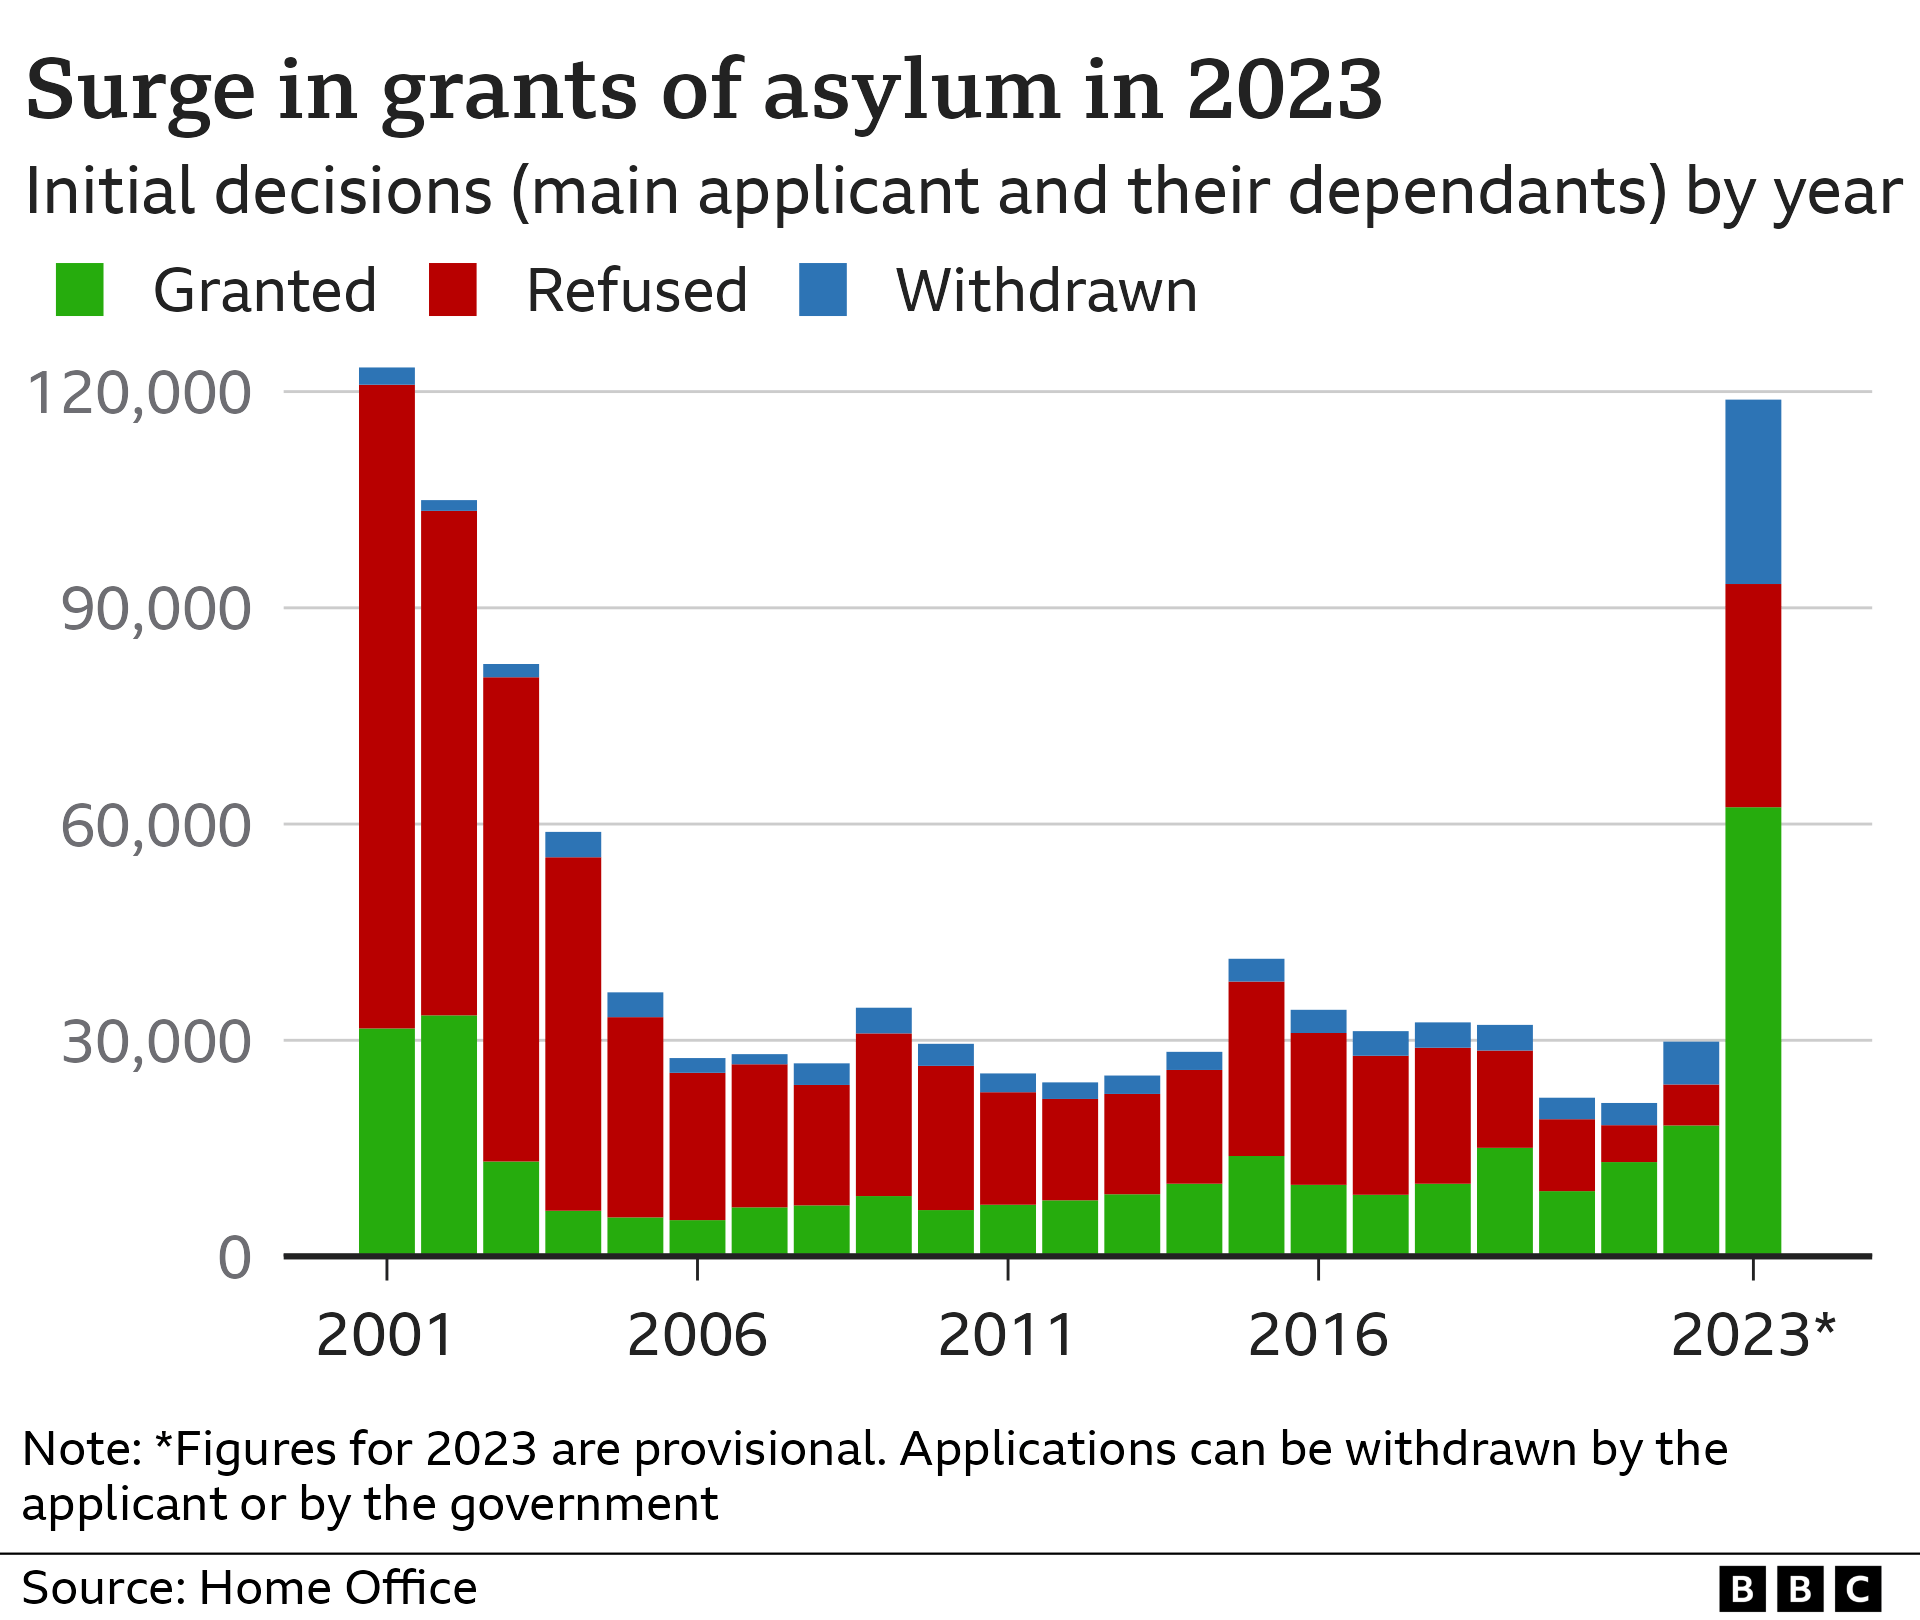 Chart showing the number of asylum decisions granted, withdrawn and refused in the UK. In 2023, the highest since 2001, there were 49,862 granted, 24,310 refused and 24,027 withdrawn